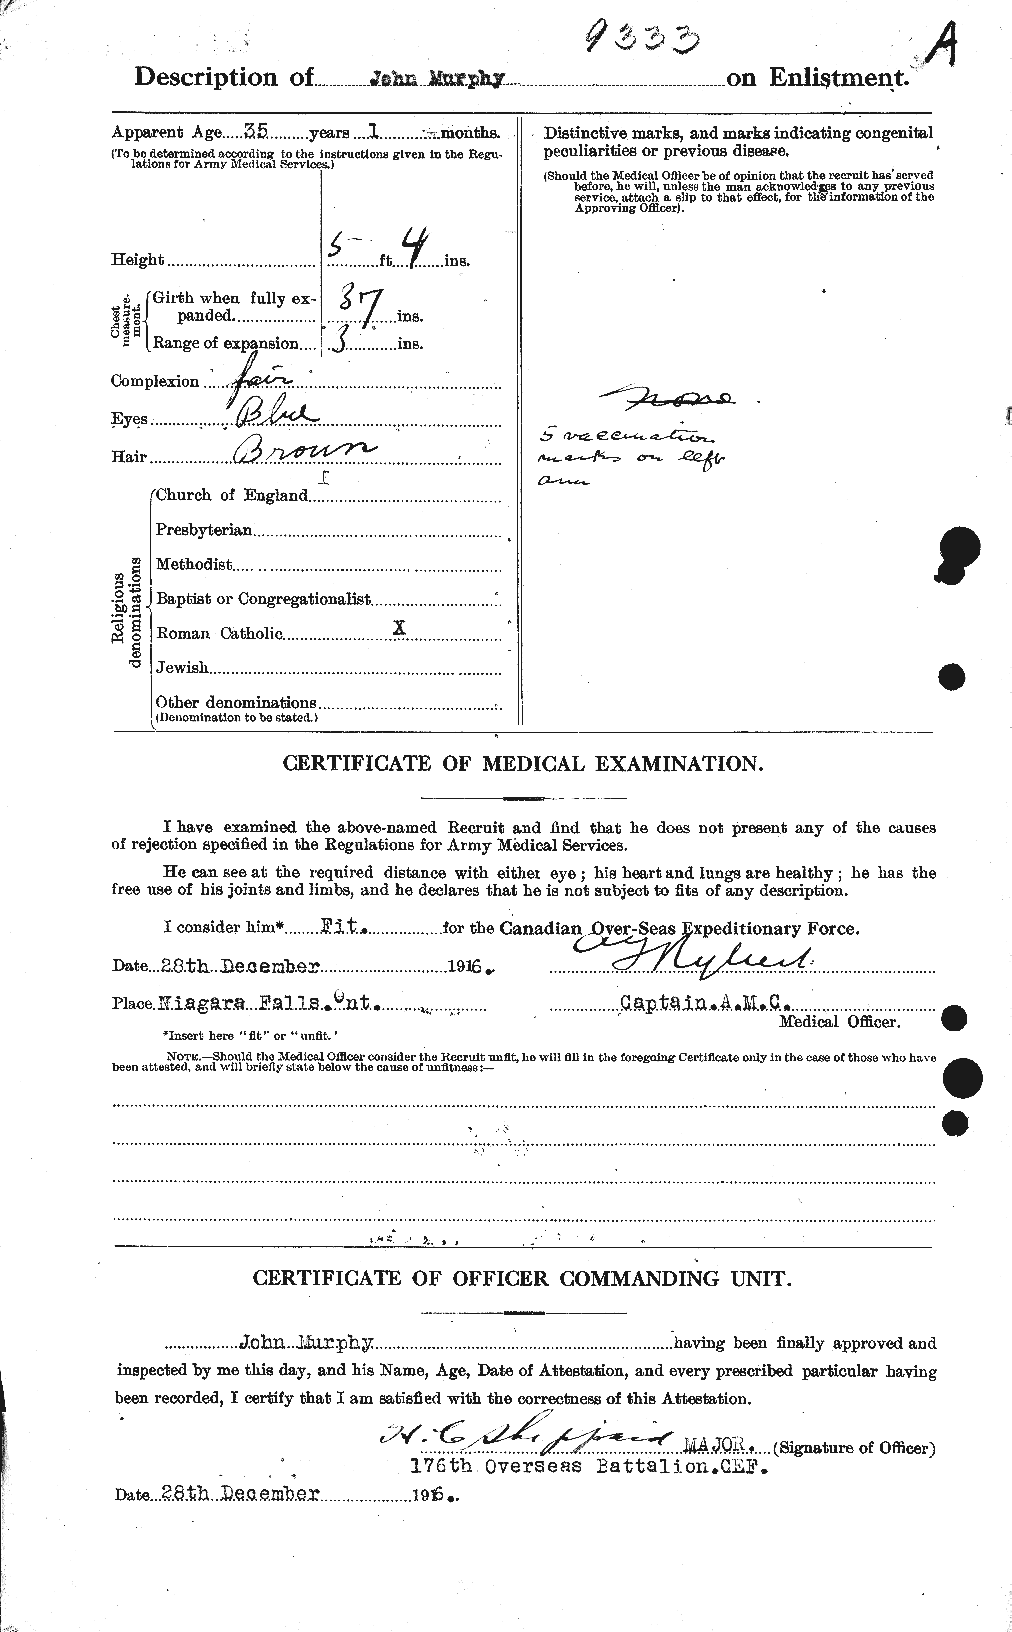 Personnel Records of the First World War - CEF 514730b